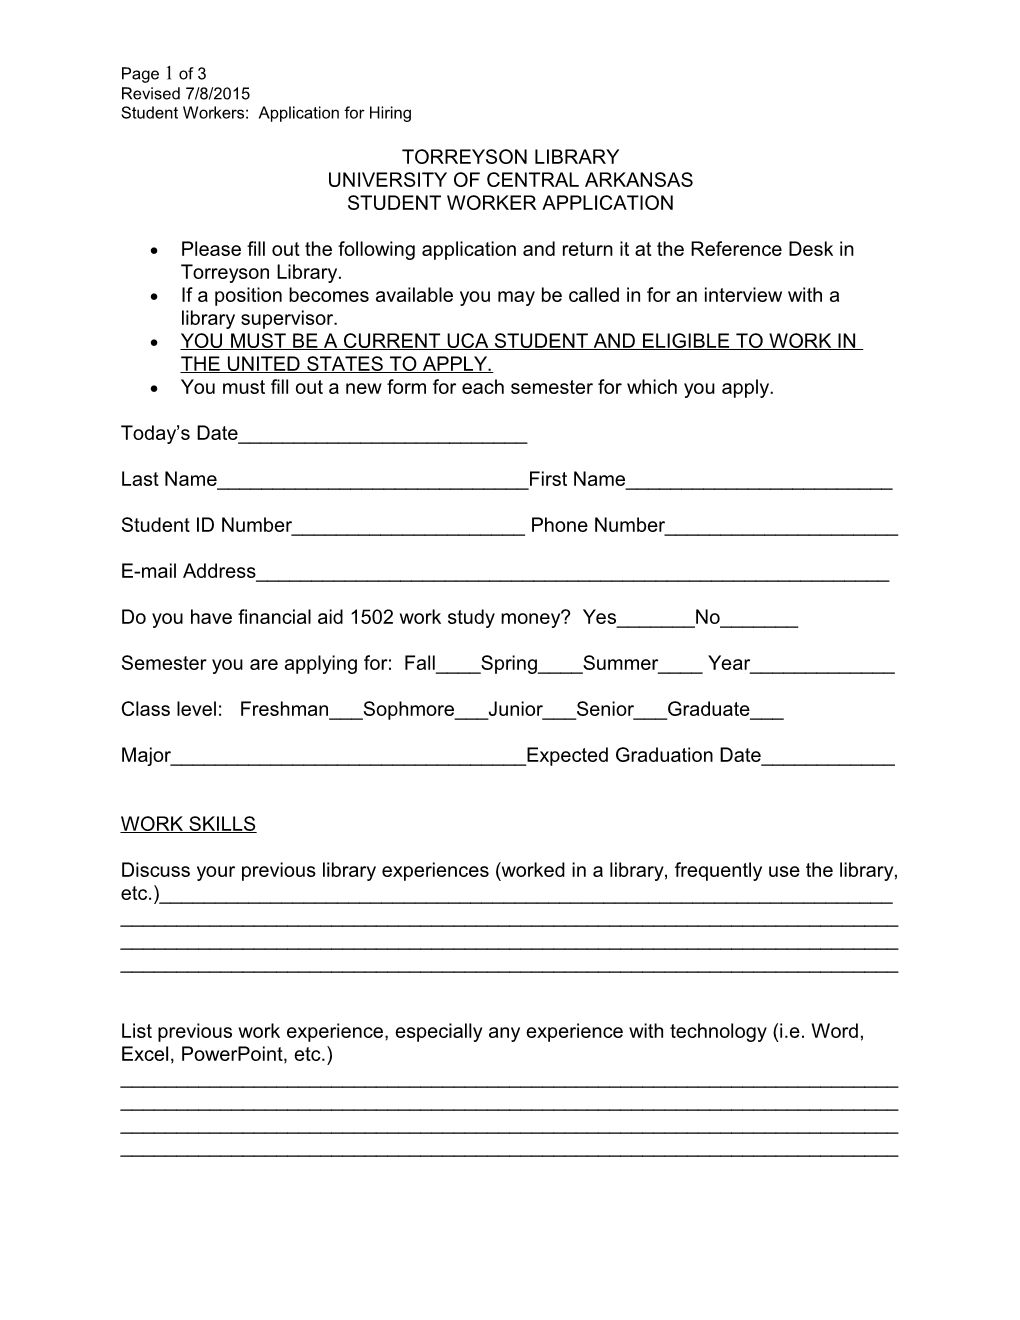 Student Workers: Application for Hiring